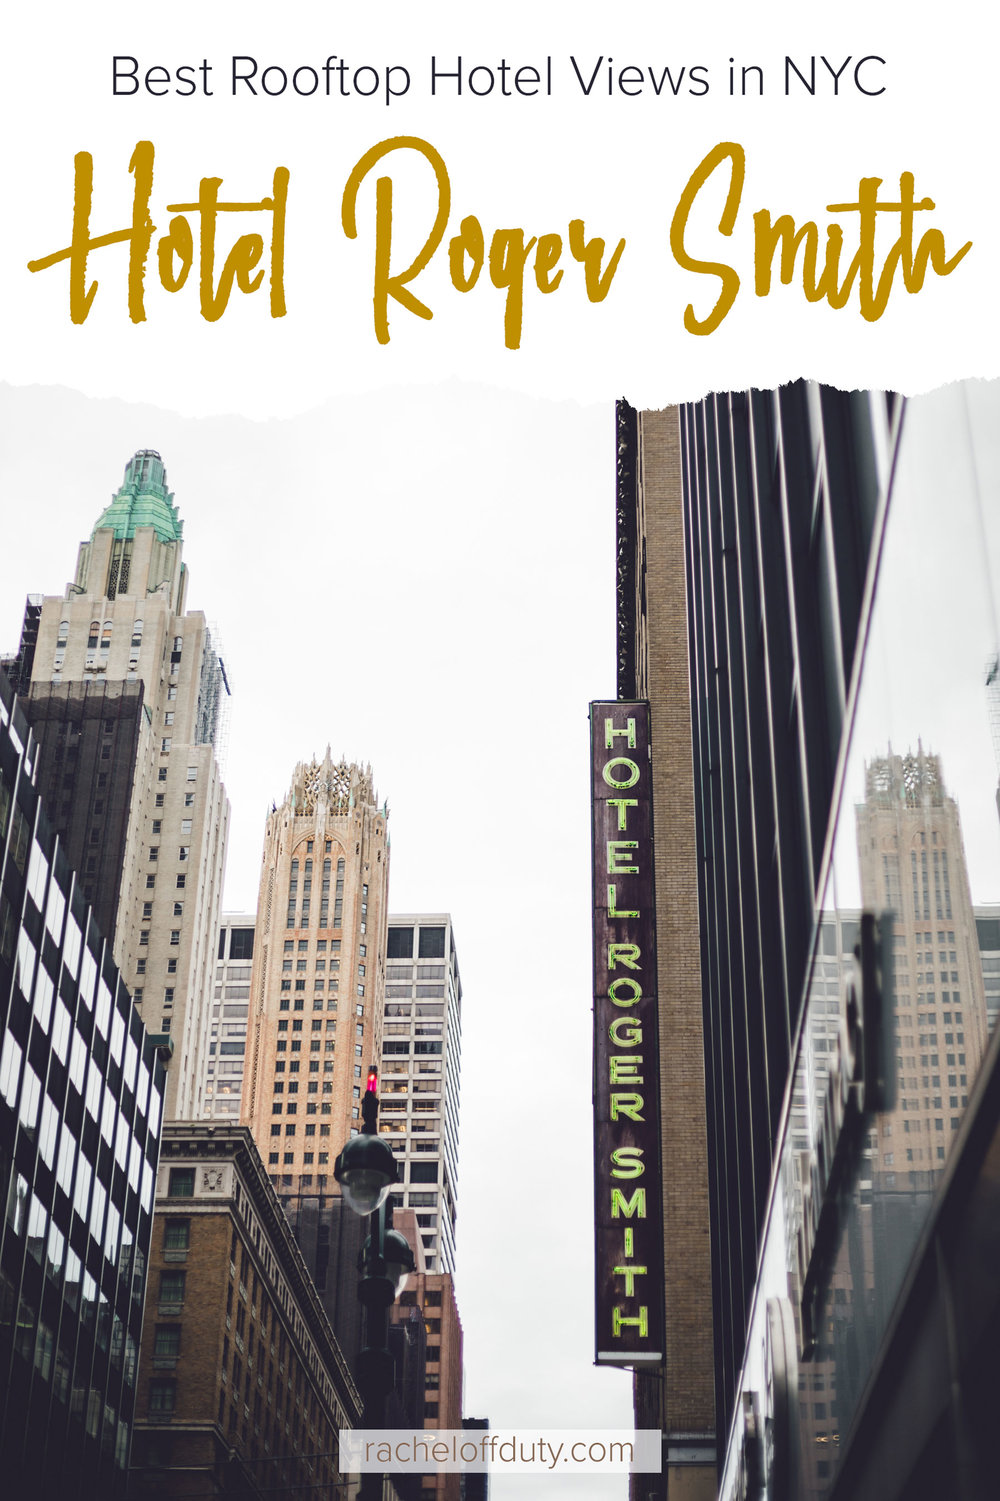 Rachel Off Duty: Where to Stay in Manhattan - the Hotel Roger Smith